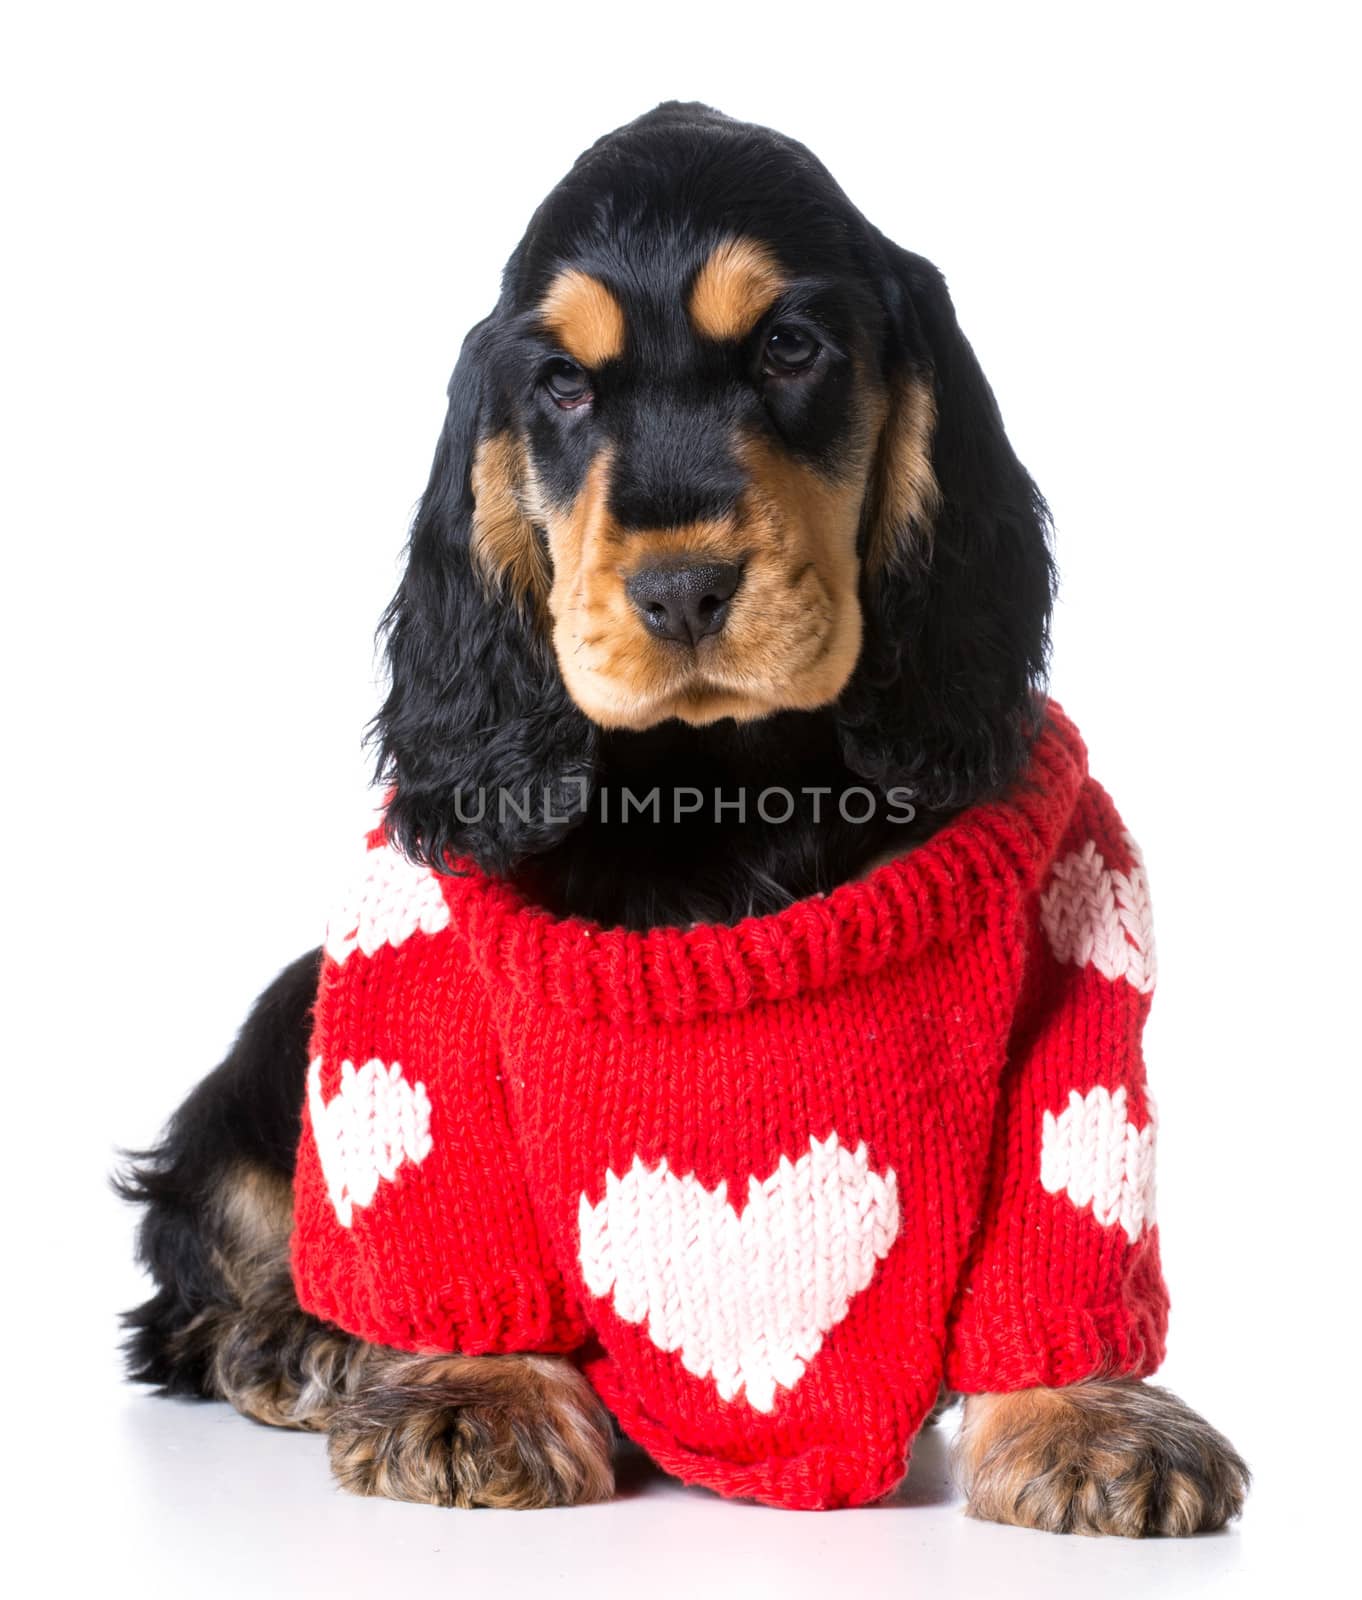 puppy love - cute english cocker spaniel puppy wearing red heart sweater on white background